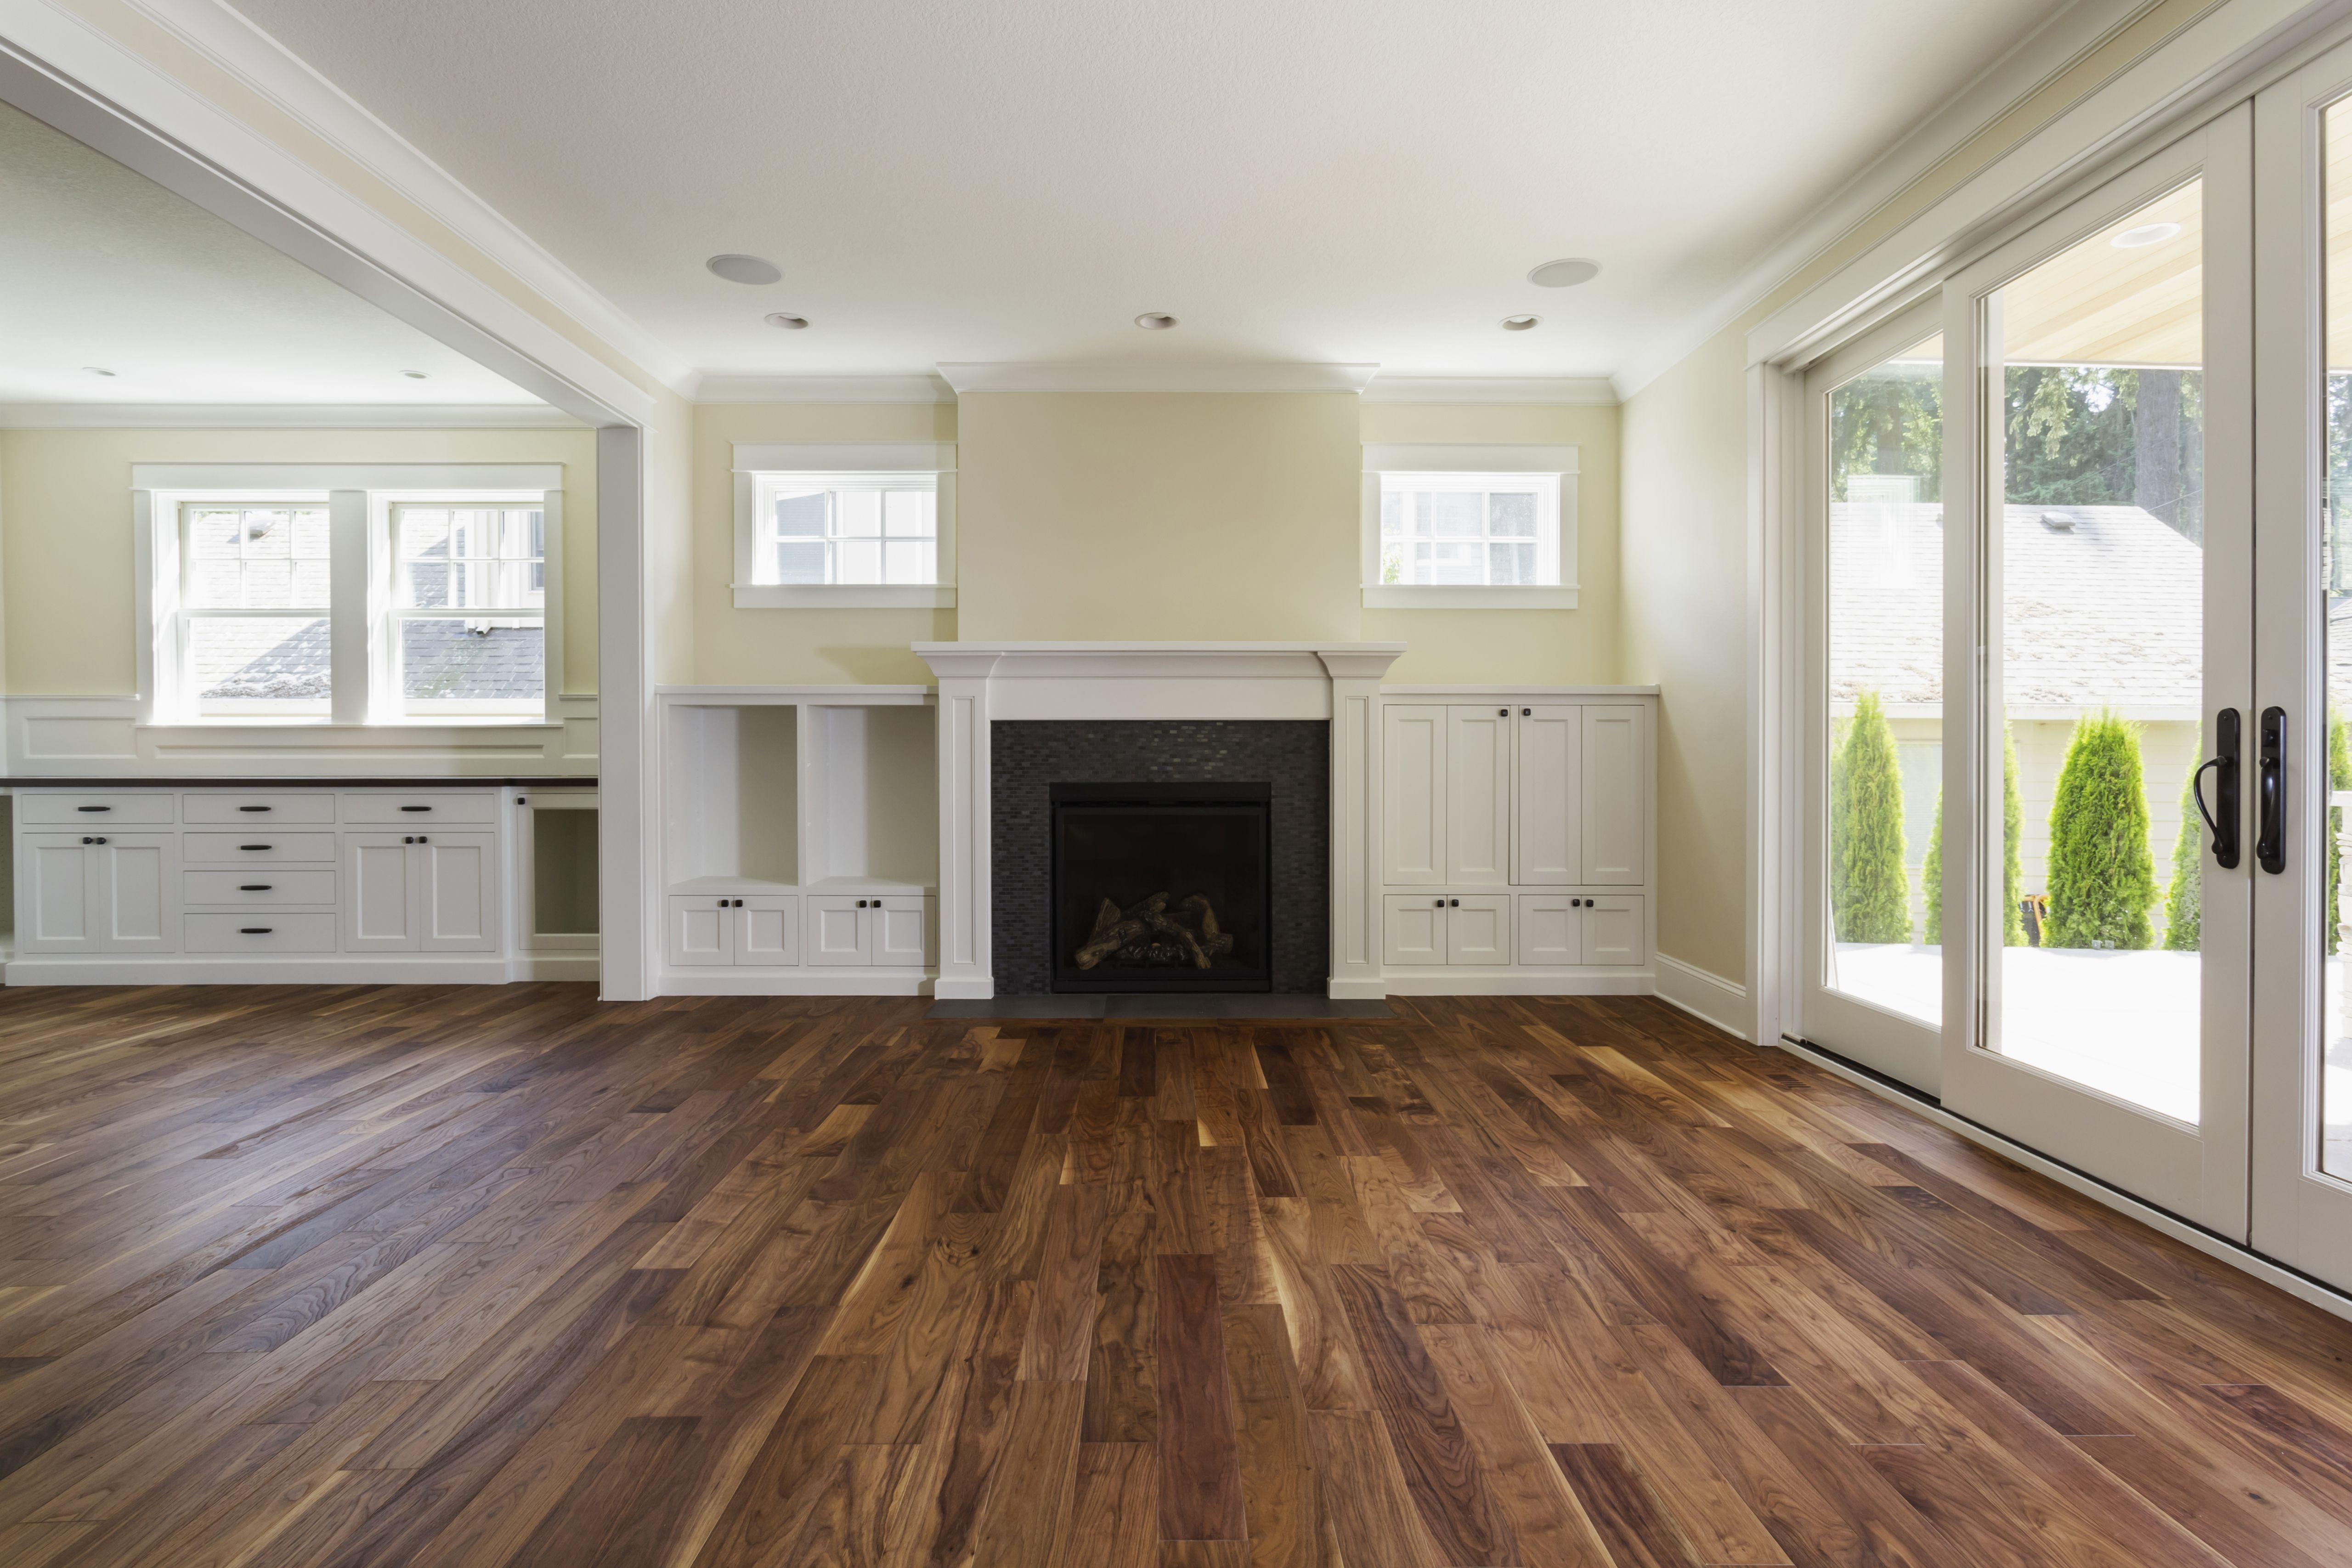 18 Fabulous wholesale Hardwood Flooring atlanta Ga 2024 free download wholesale hardwood flooring atlanta ga of the pros and cons of prefinished hardwood flooring with fireplace and built in shelves in living room 482143011 57bef8e33df78cc16e035397